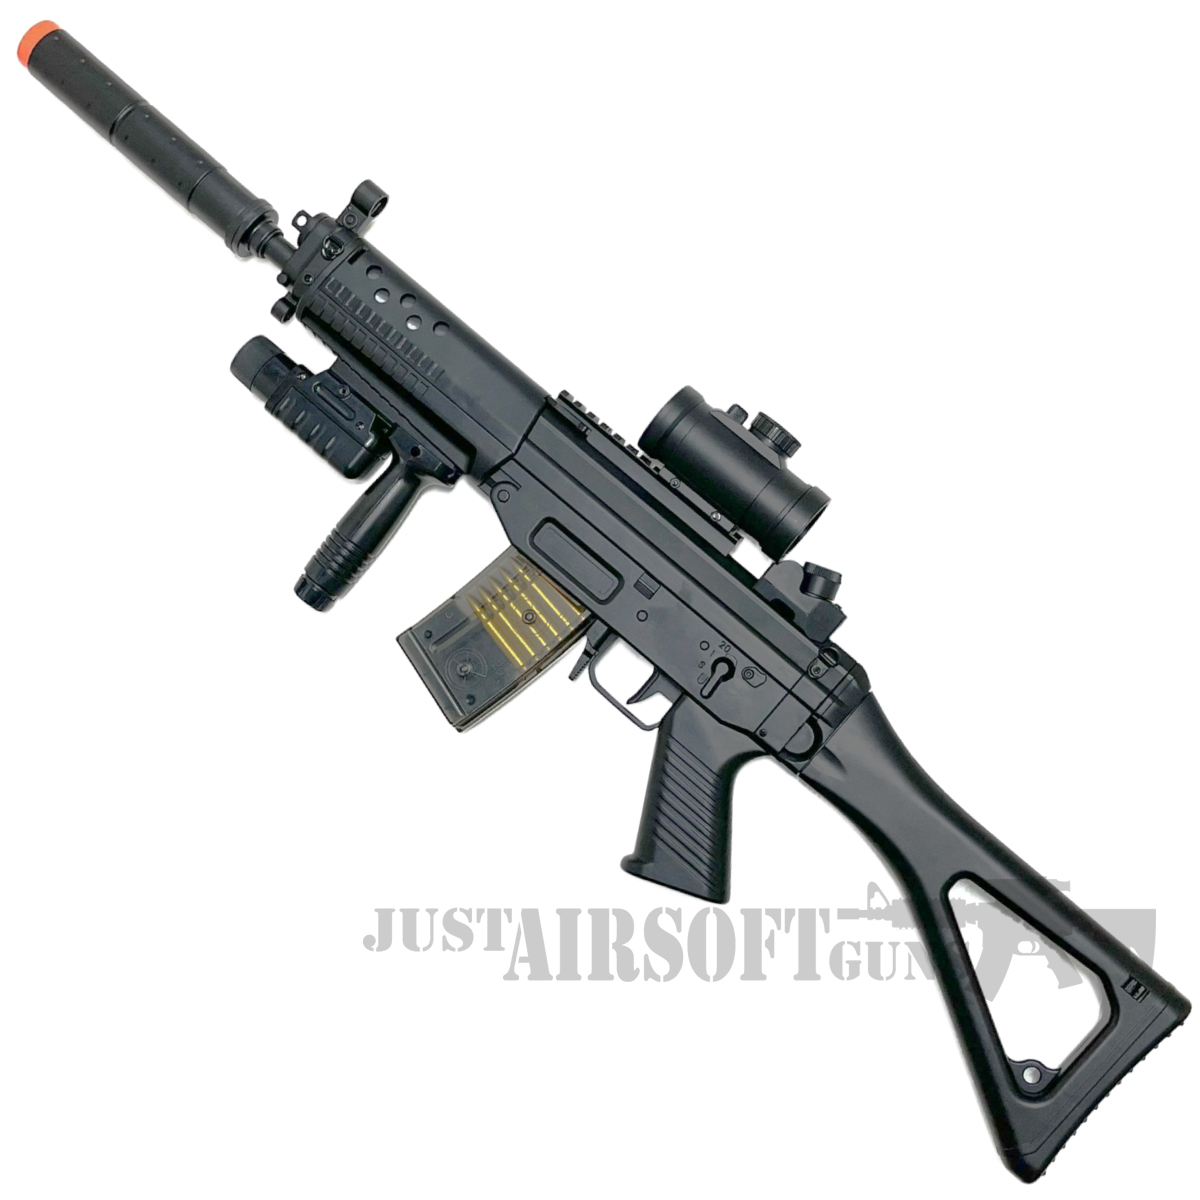 DOUBLE EAGLE M82 SIG 552 AIRSOFT ELECTRIC RIFLE FULL AUTO – M82 1